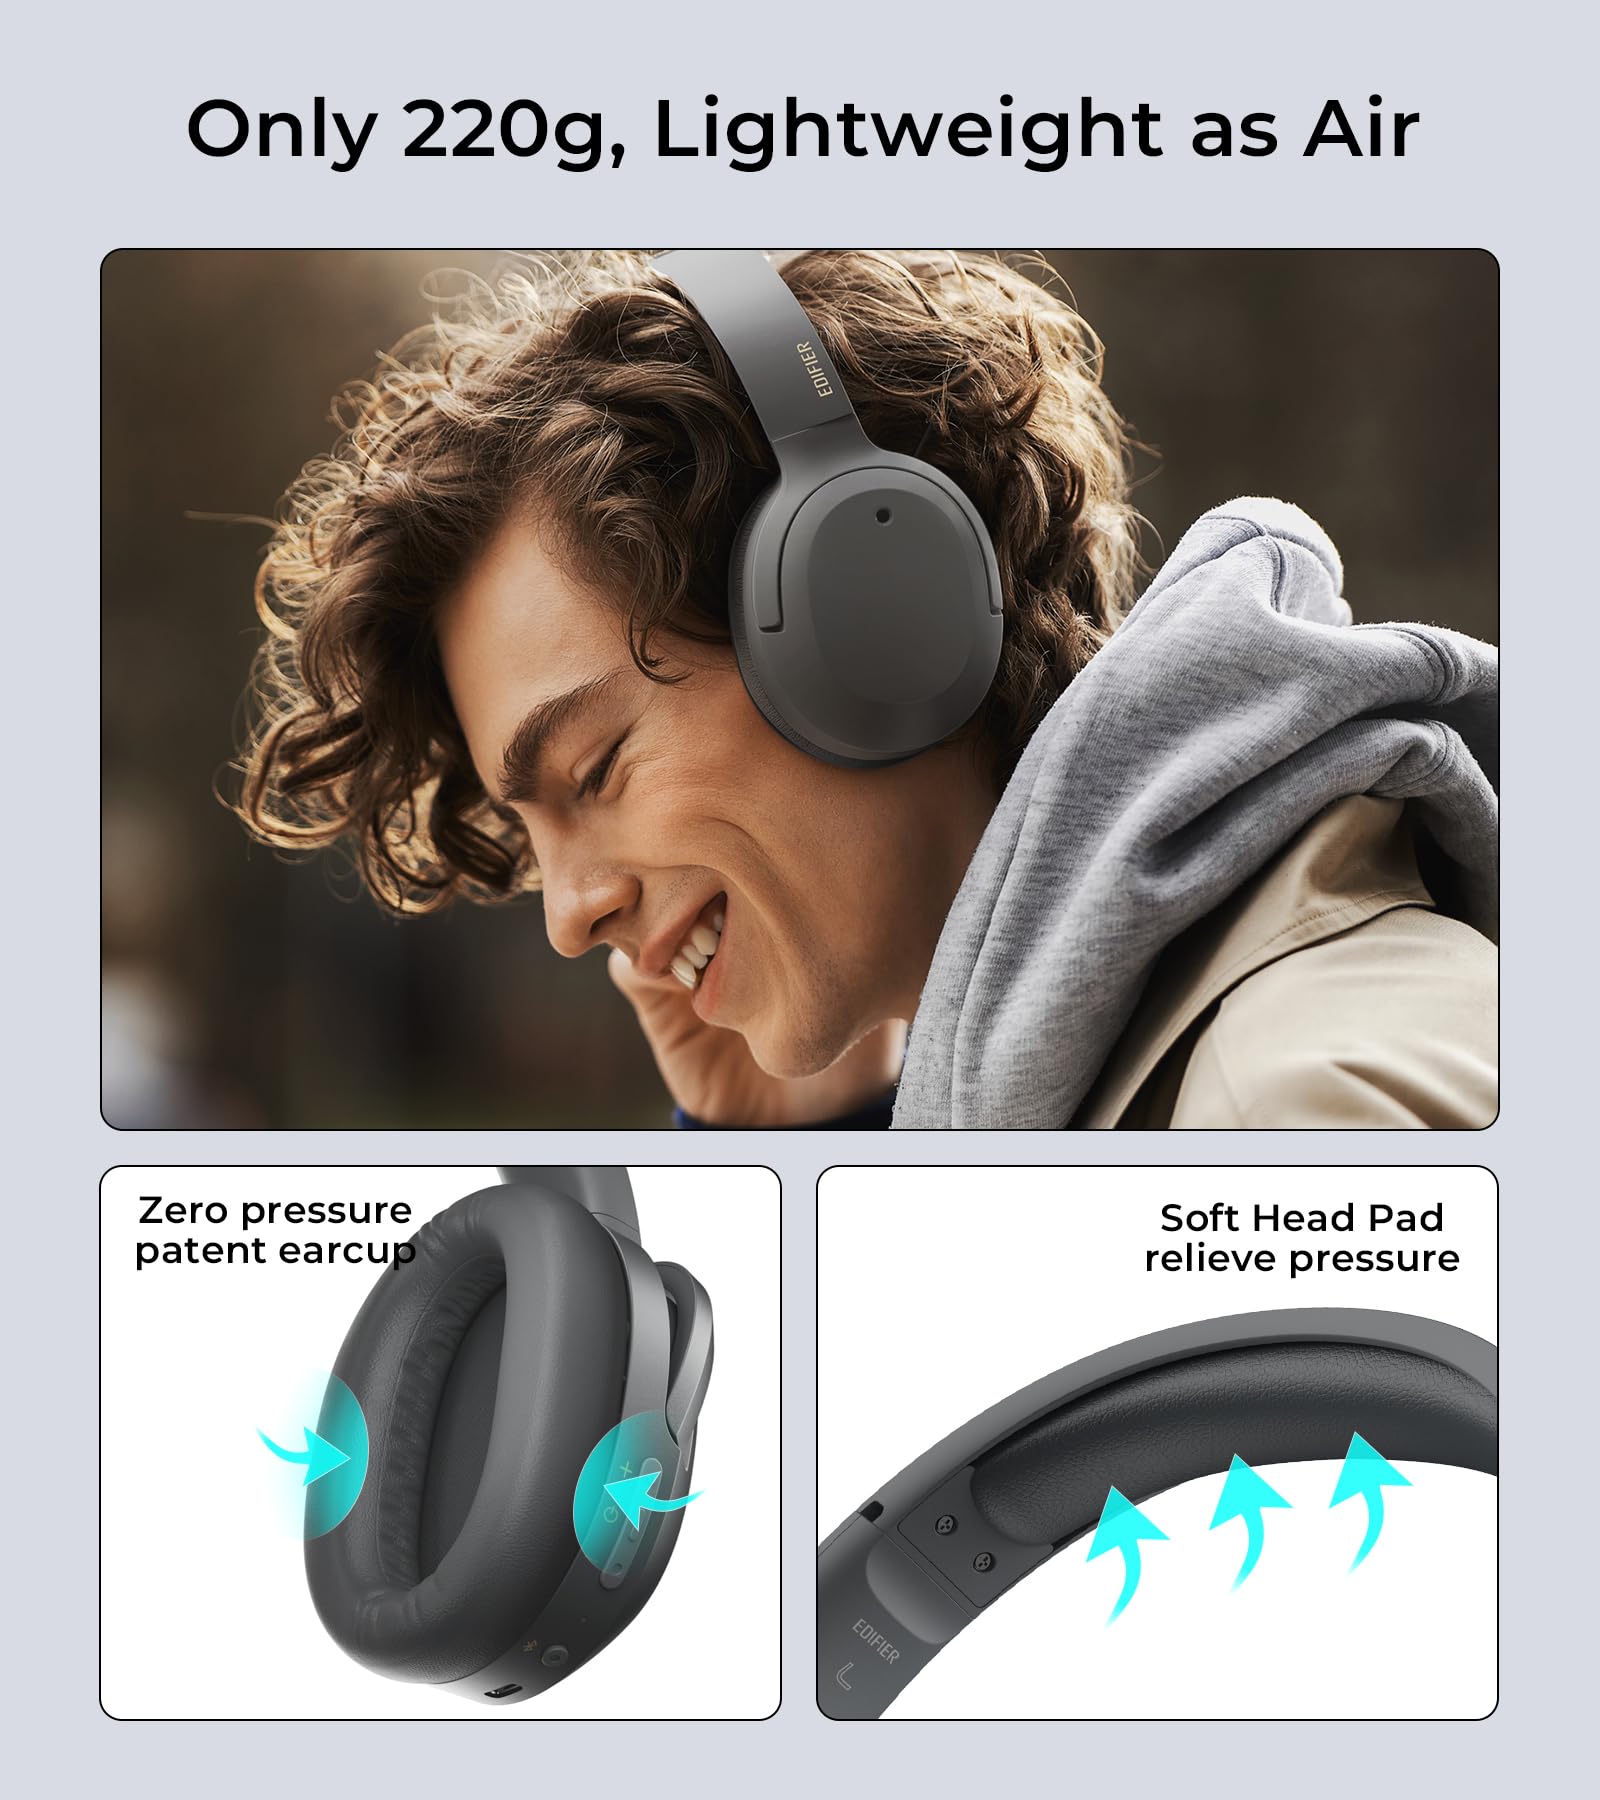 Edifier W820NB Plus Hybrid Active Noise Cancelling Headphones - LDAC Codec - Hi-Res Audio - Fast Charge - Over Ear Bluetooth V5.2 Headphones for Travel, Flight, Train, and Commute- Gray